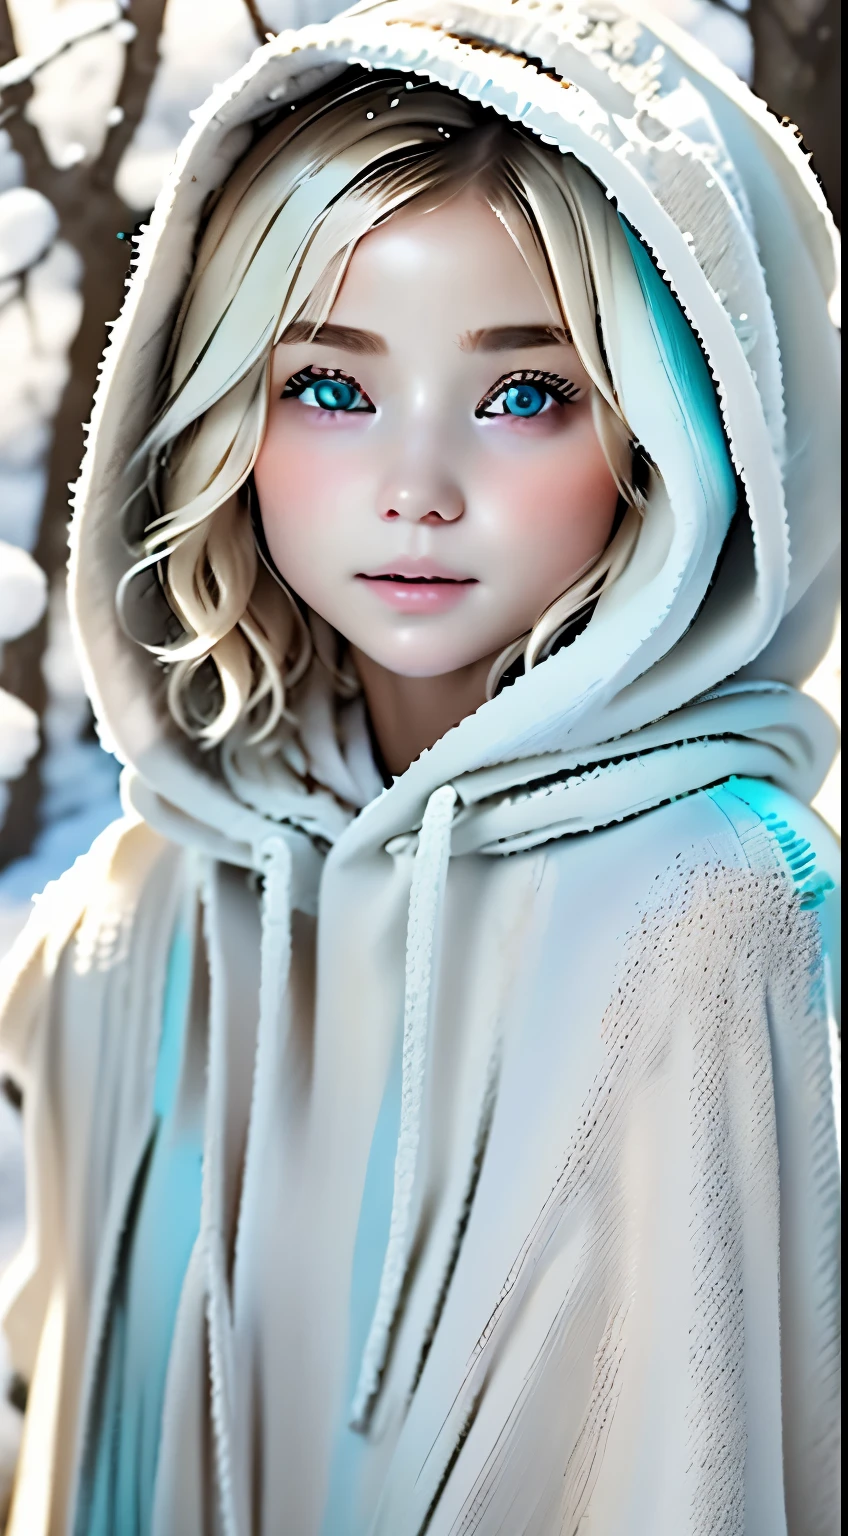 outdoor:1.5、winter、snow、White World、Frozen World、White world、one girl、24 only、perfect anatomy、correct human body、ash blonde、layered haircut、short wavy hair、Woman with cute face、turquoise eyes、Perfect good looks、Natural color poncho style hoodie、wearing a hood、silence、outdoor、white wall、rhyme、White world、blurred background、natural soft light、born、Photoreal、最high quality、high quality、High level image quality、